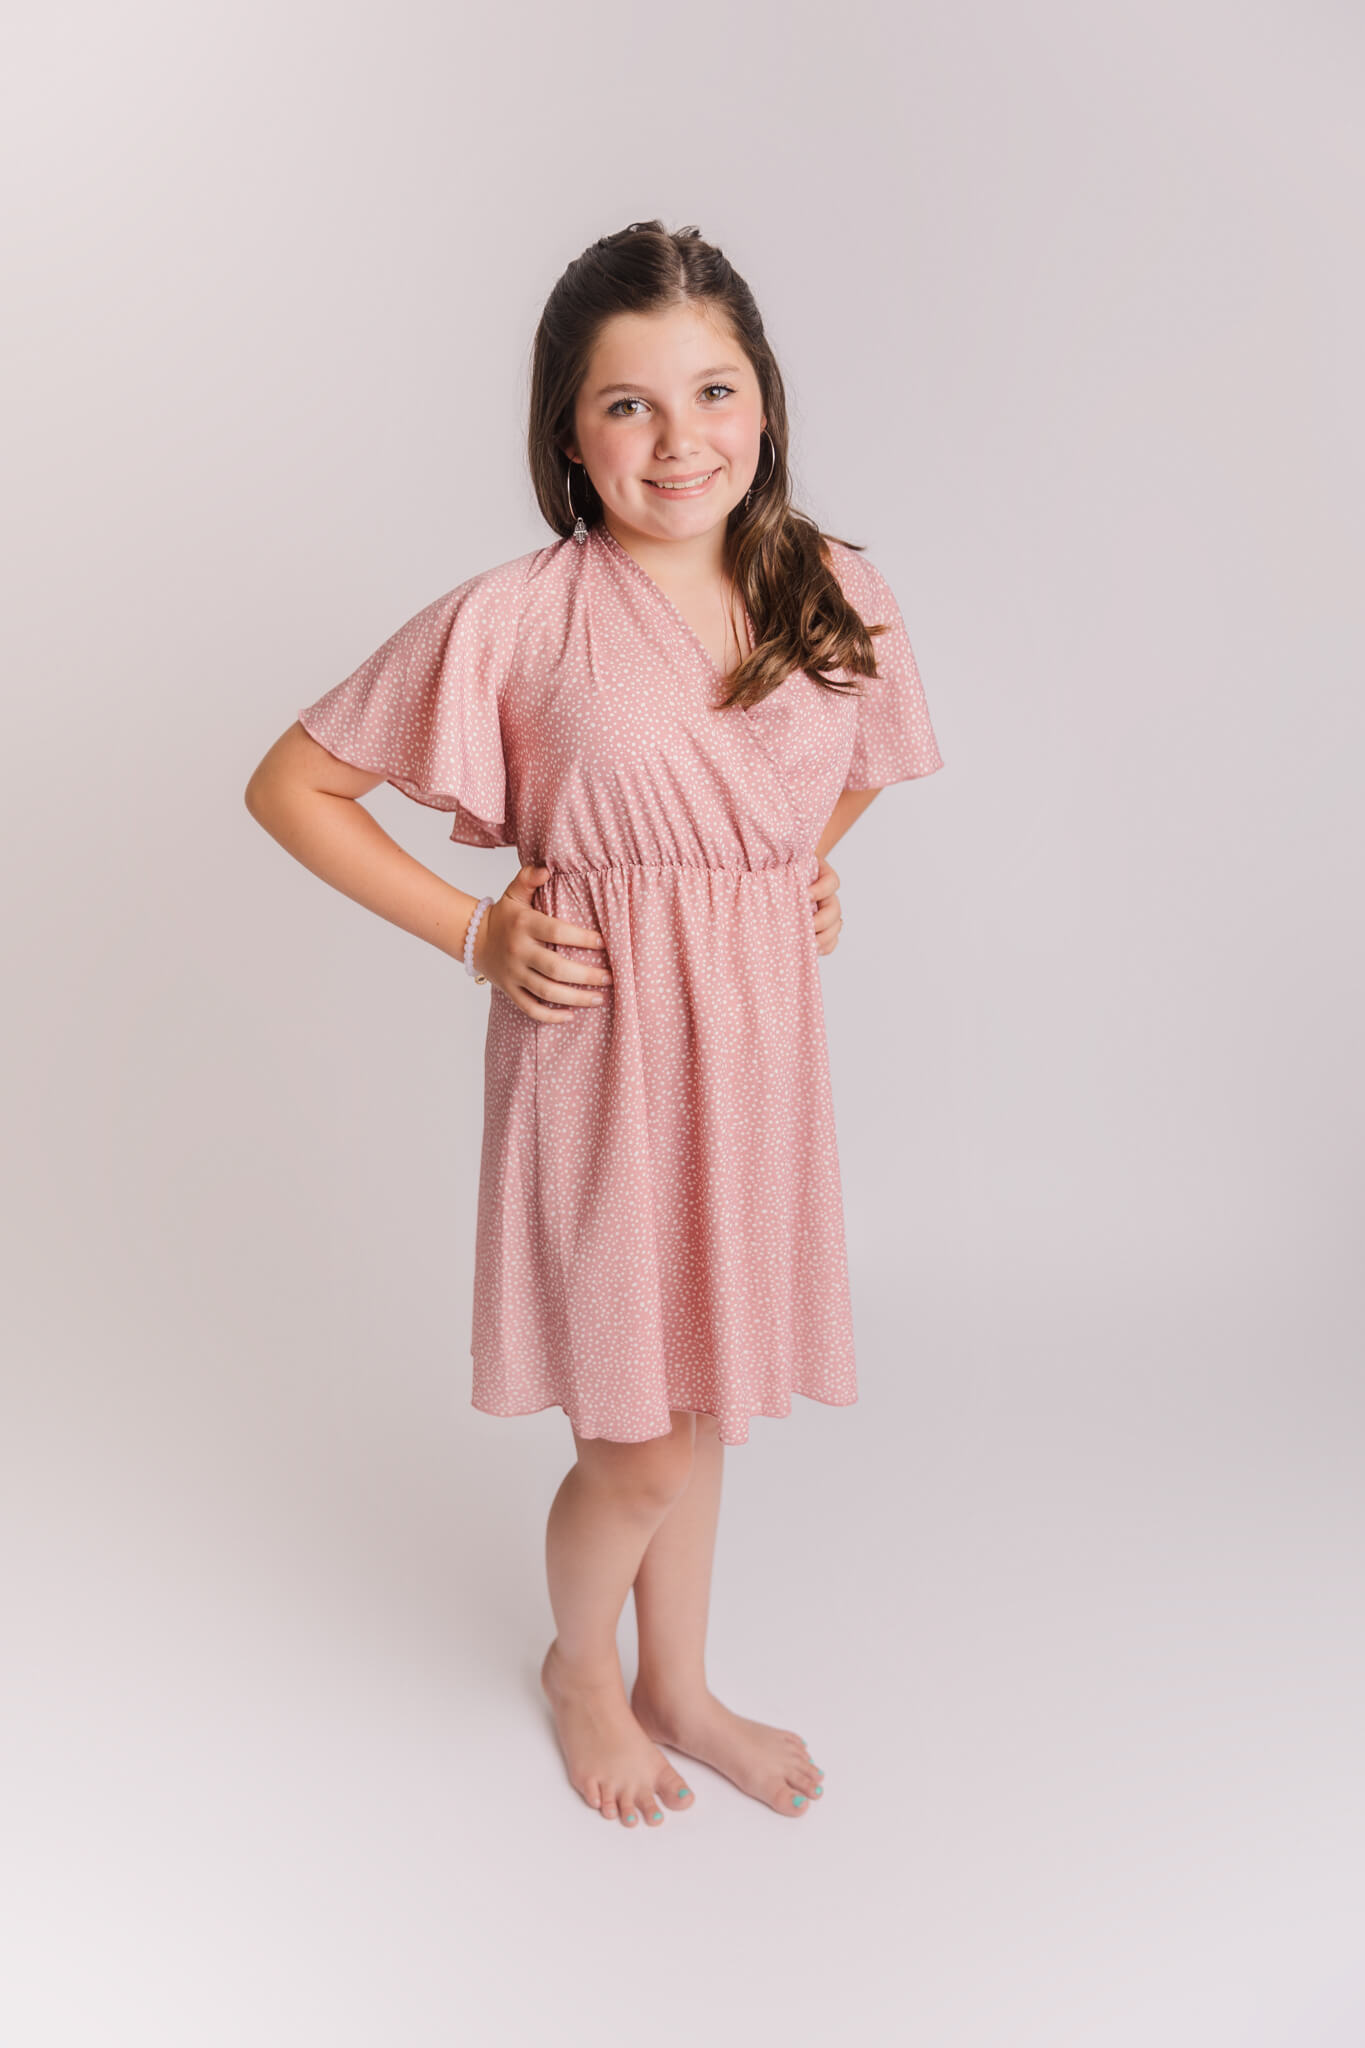 girl in pink dress posing on a white backdrop